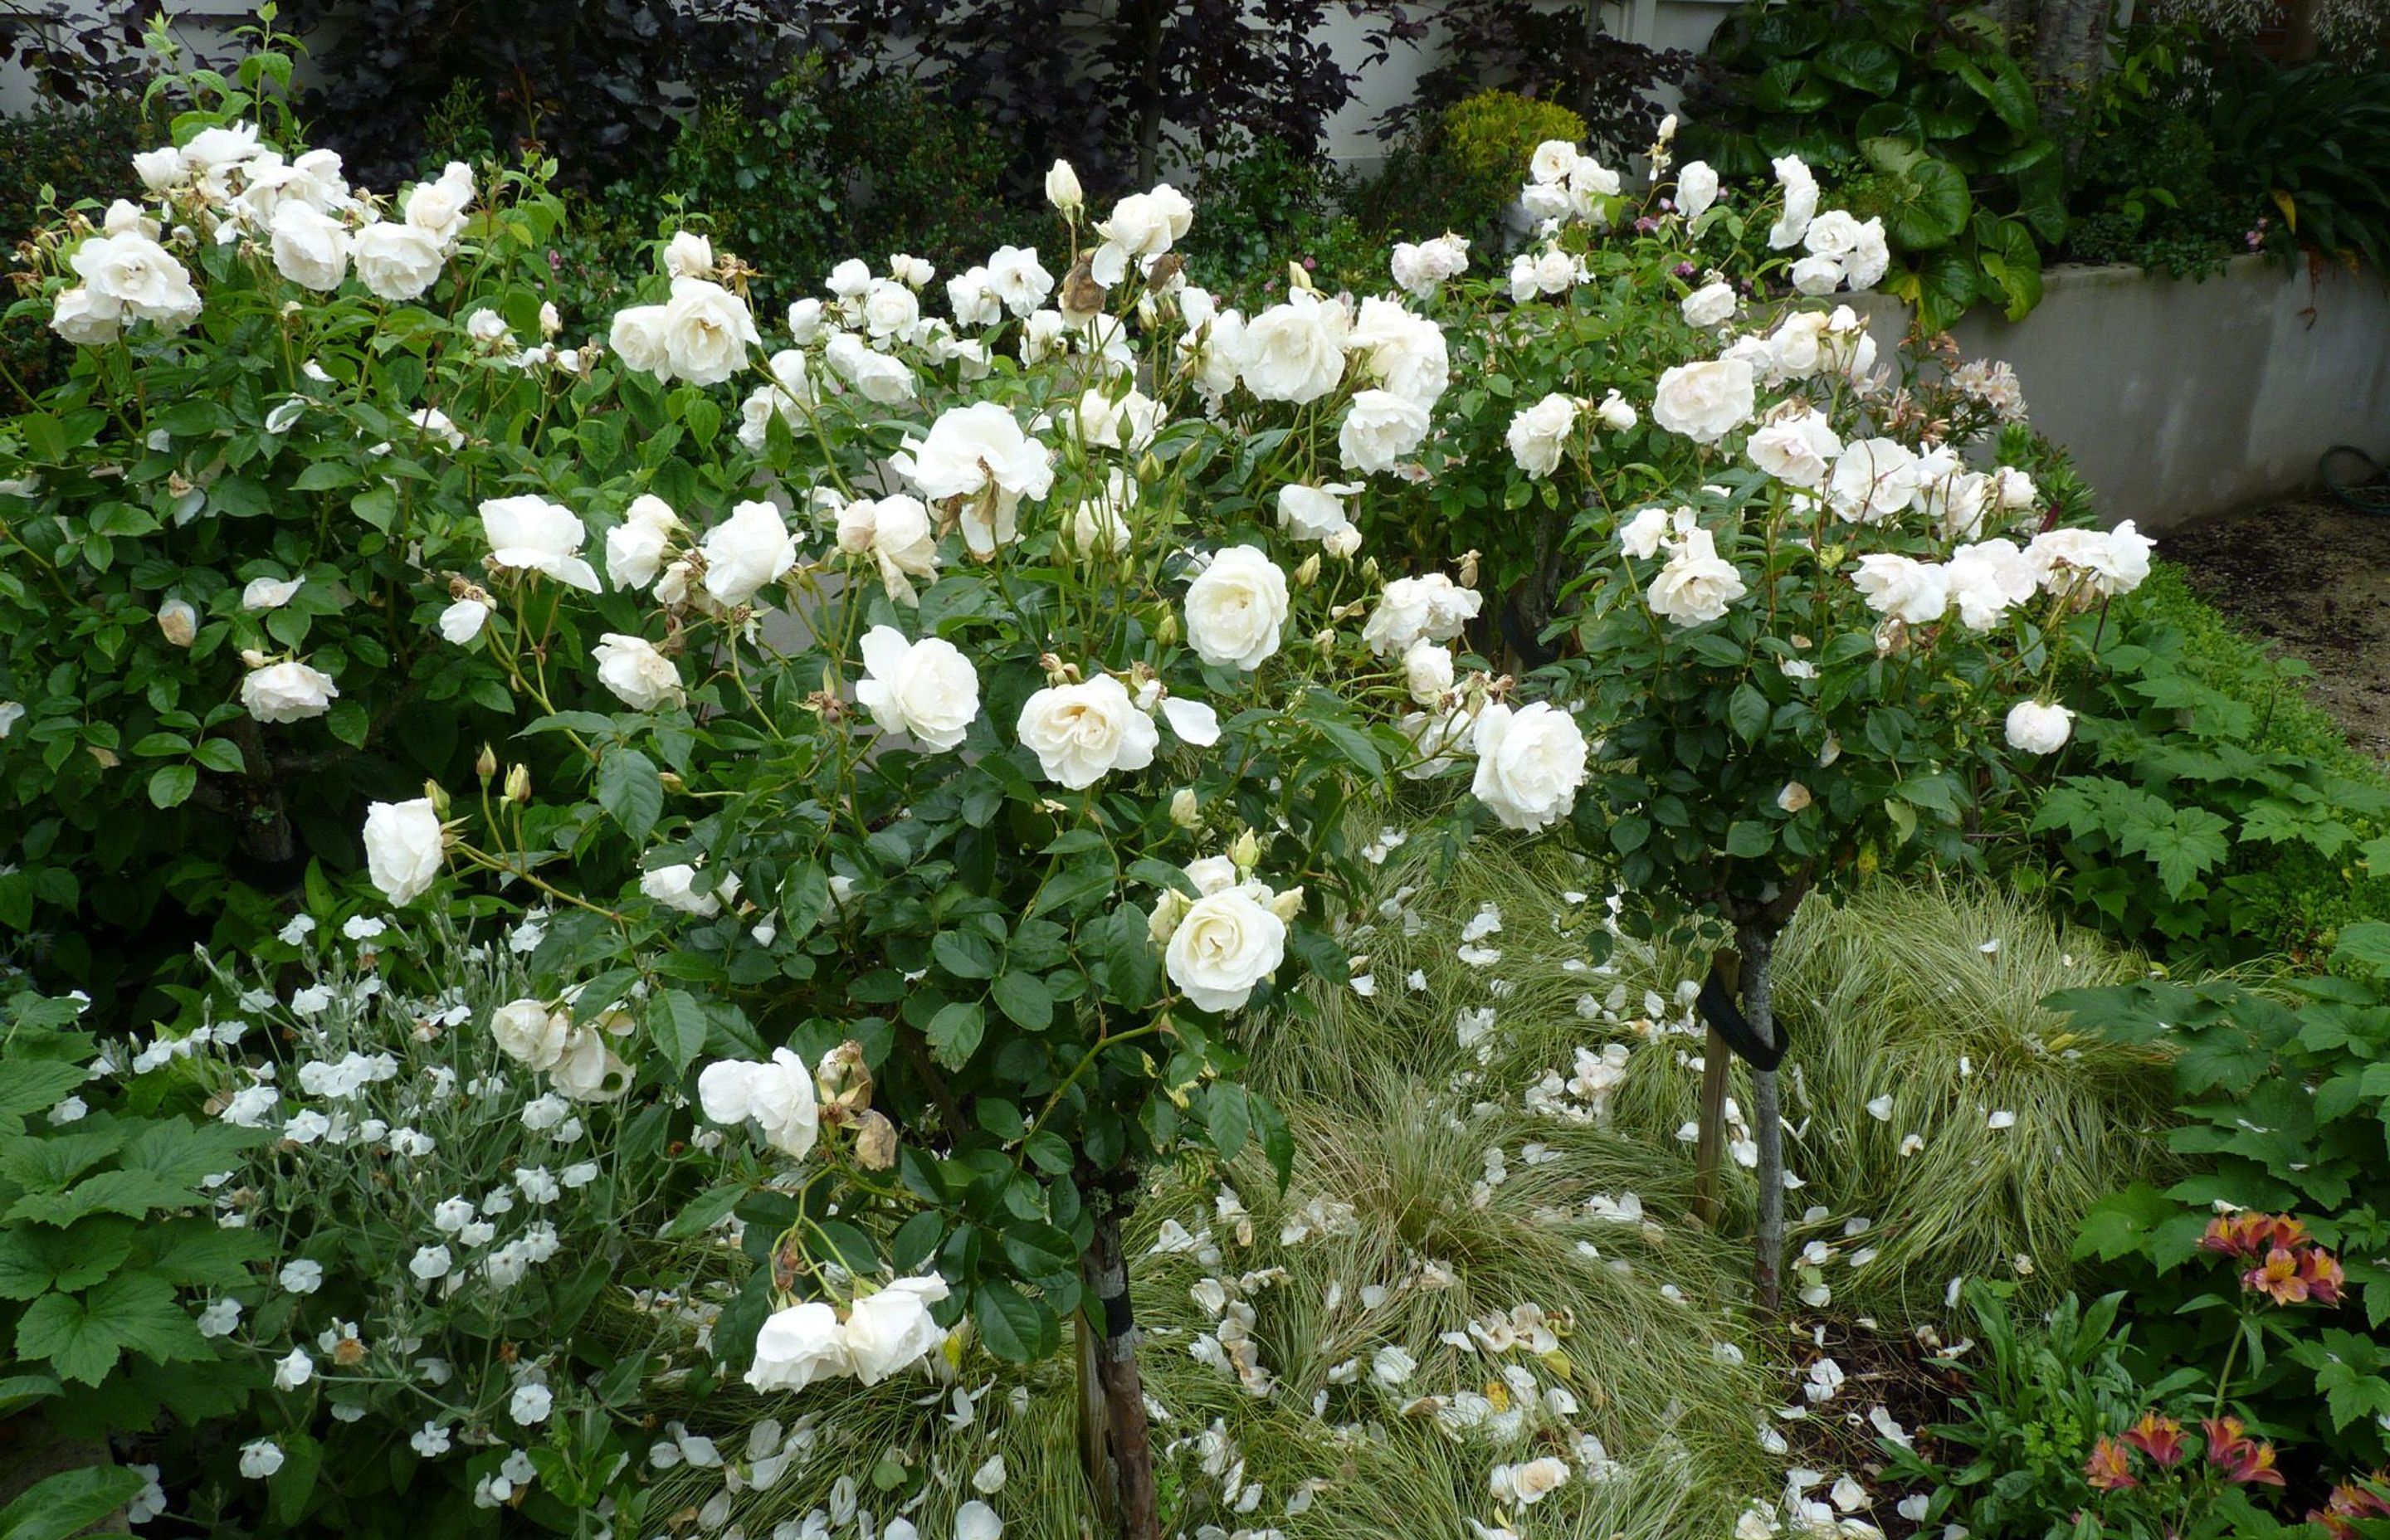 Roses underplanted with grasses